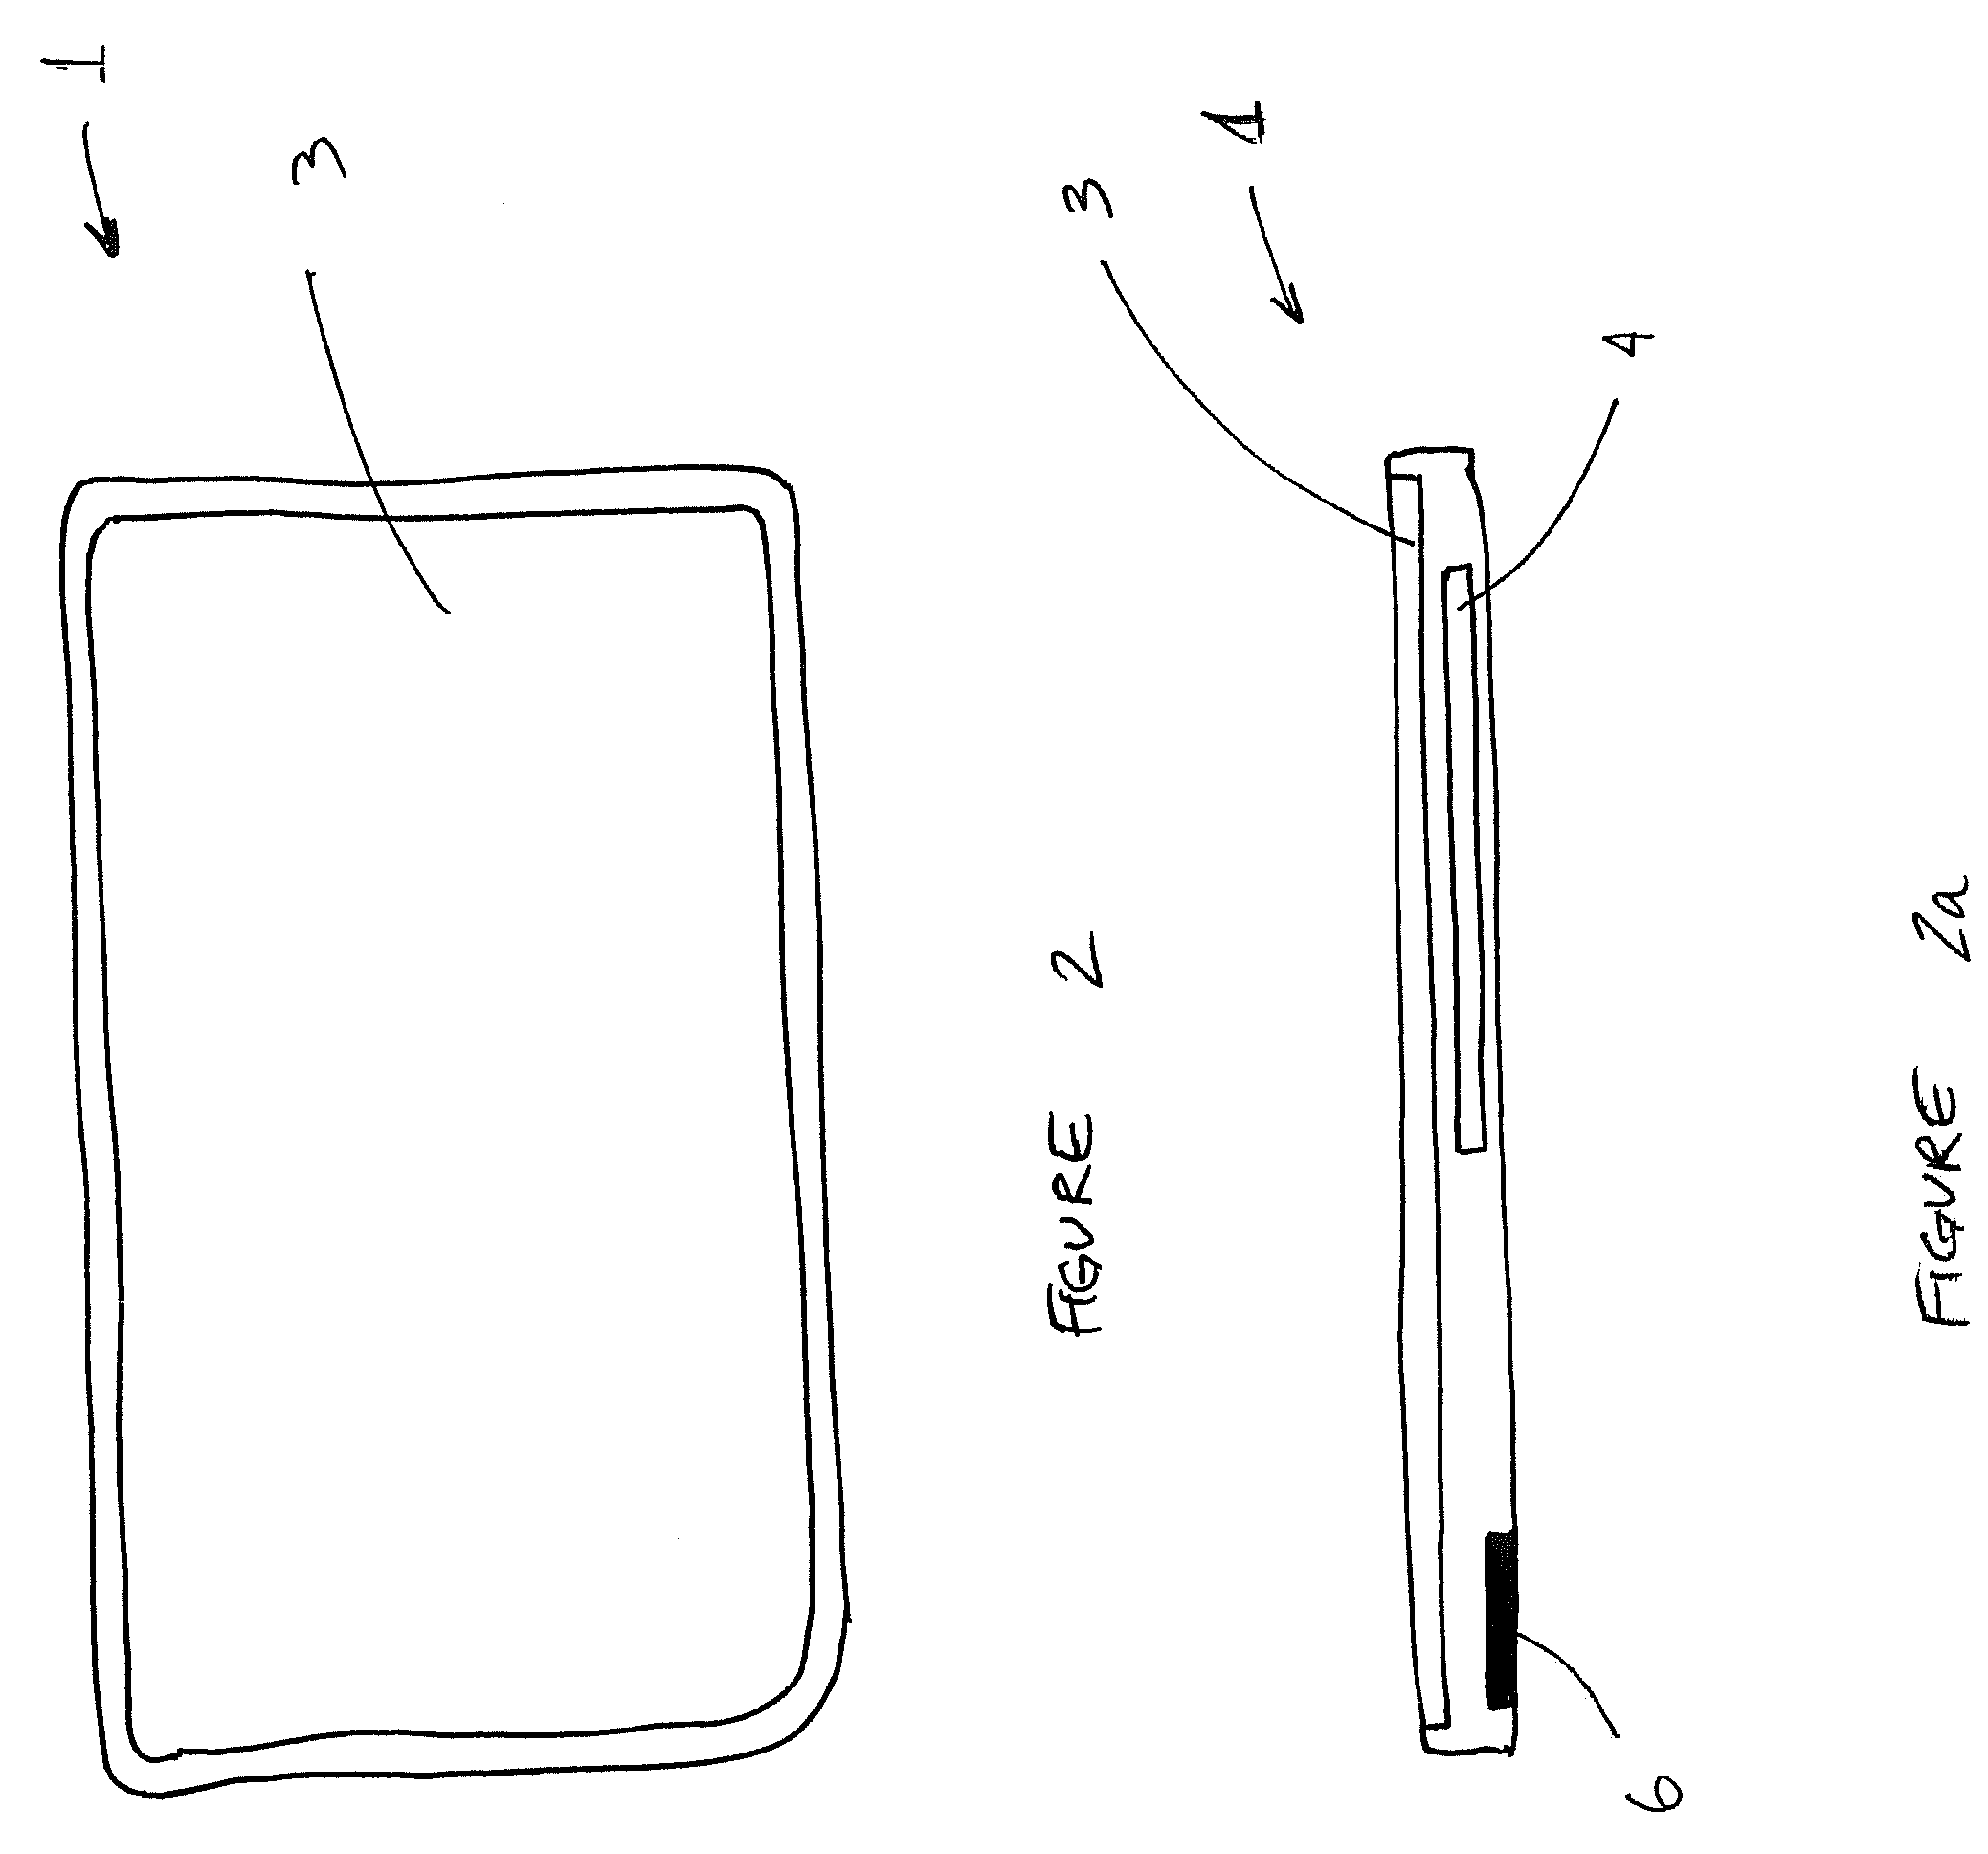 Self contained device for displaying electronic information